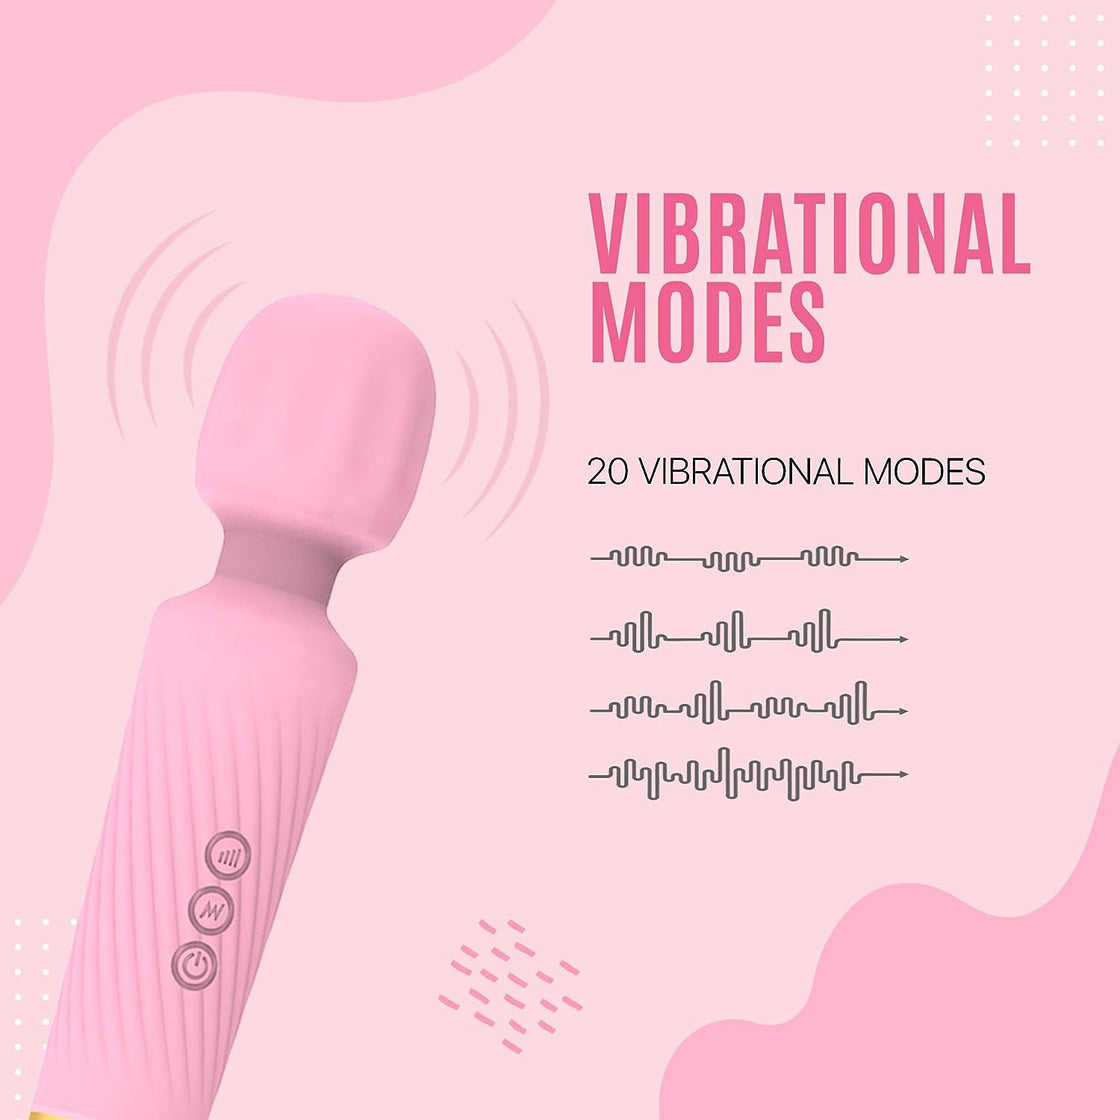 Love Lush Body Massager (Color Subject to availability)